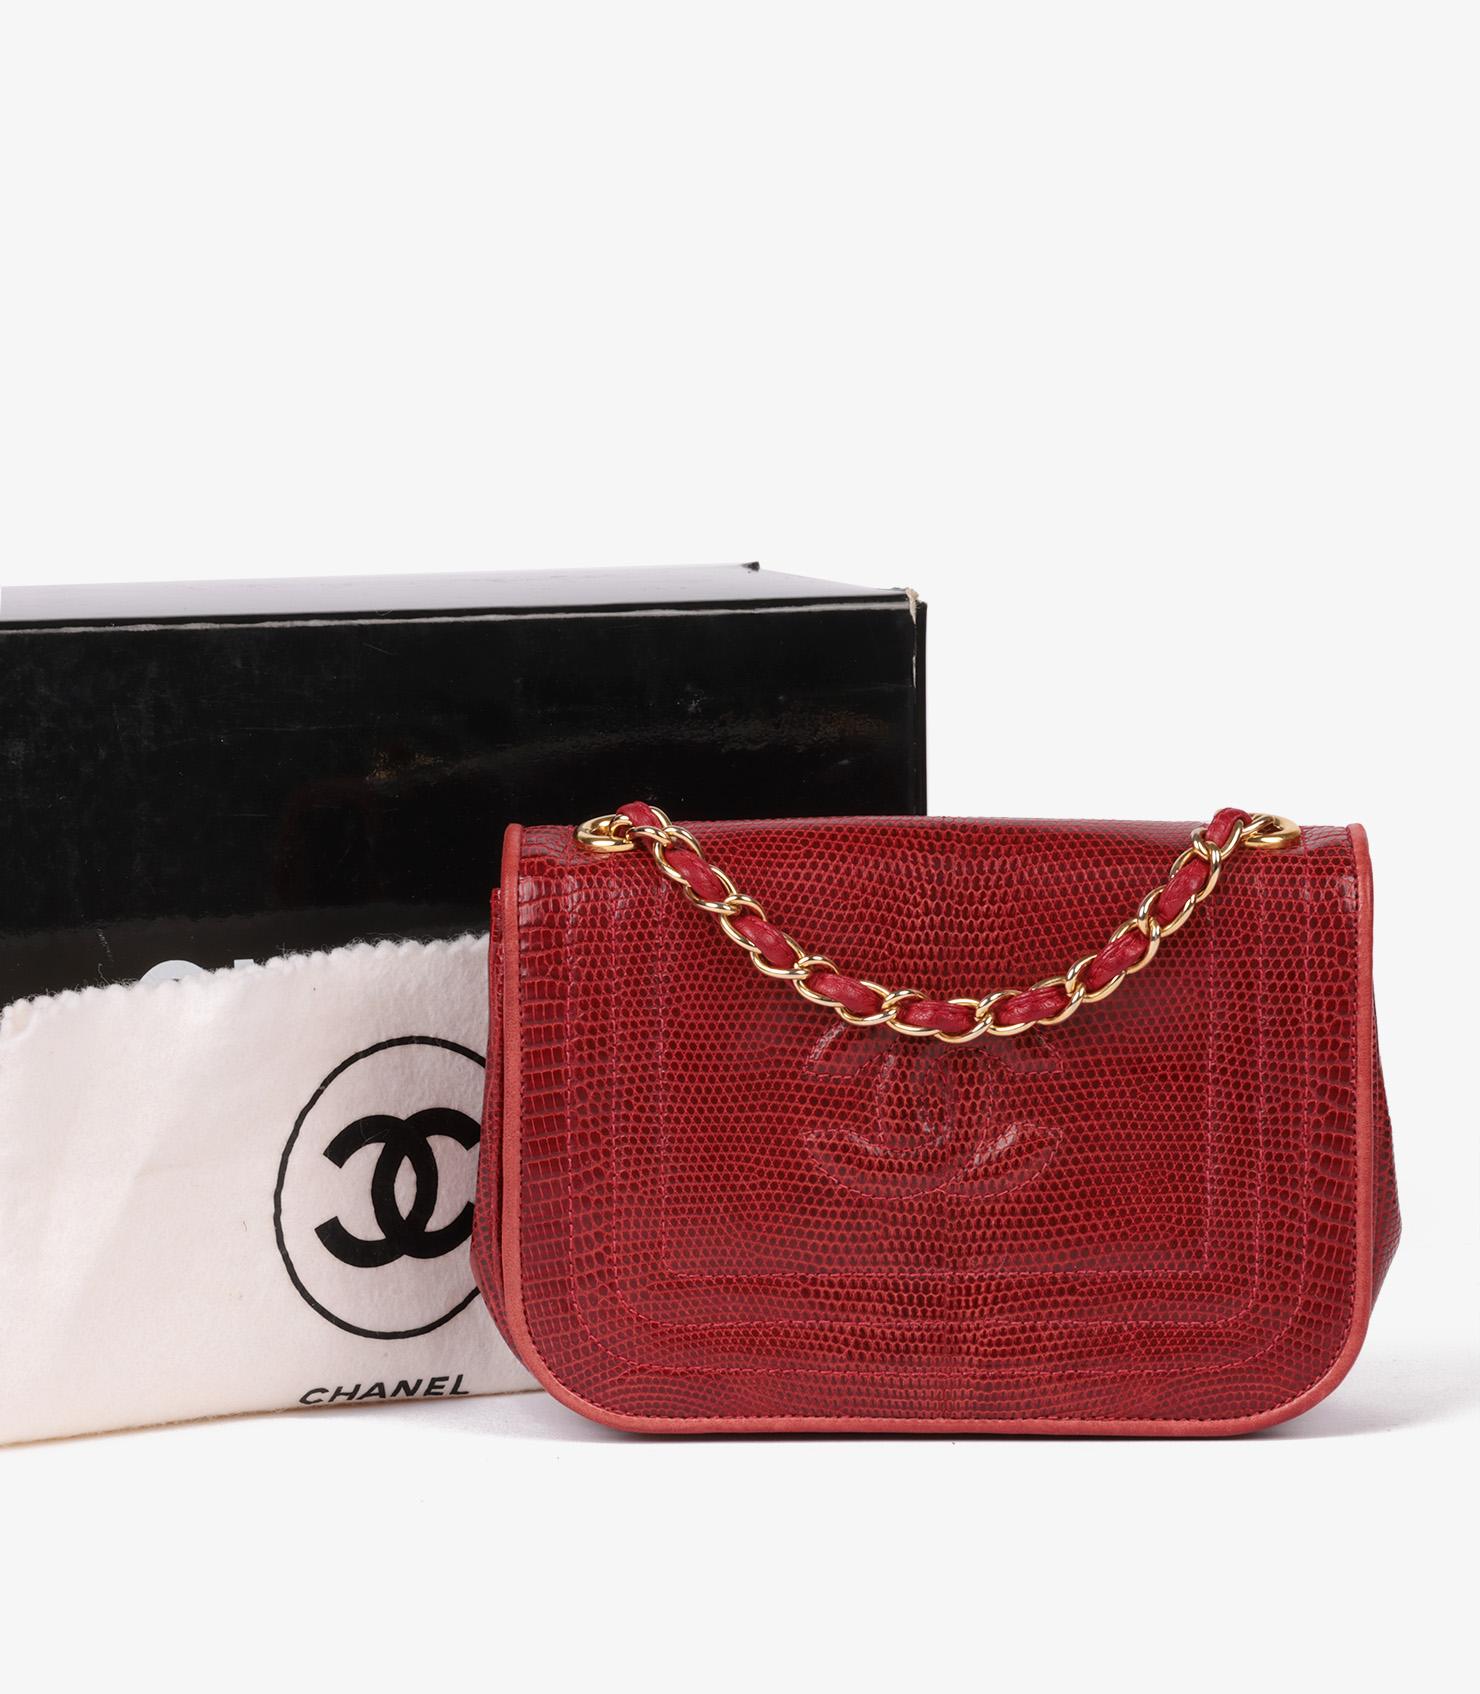 Chanel Red Lizard Leather Vintage Timeless Mini Flap Bag For Sale 6